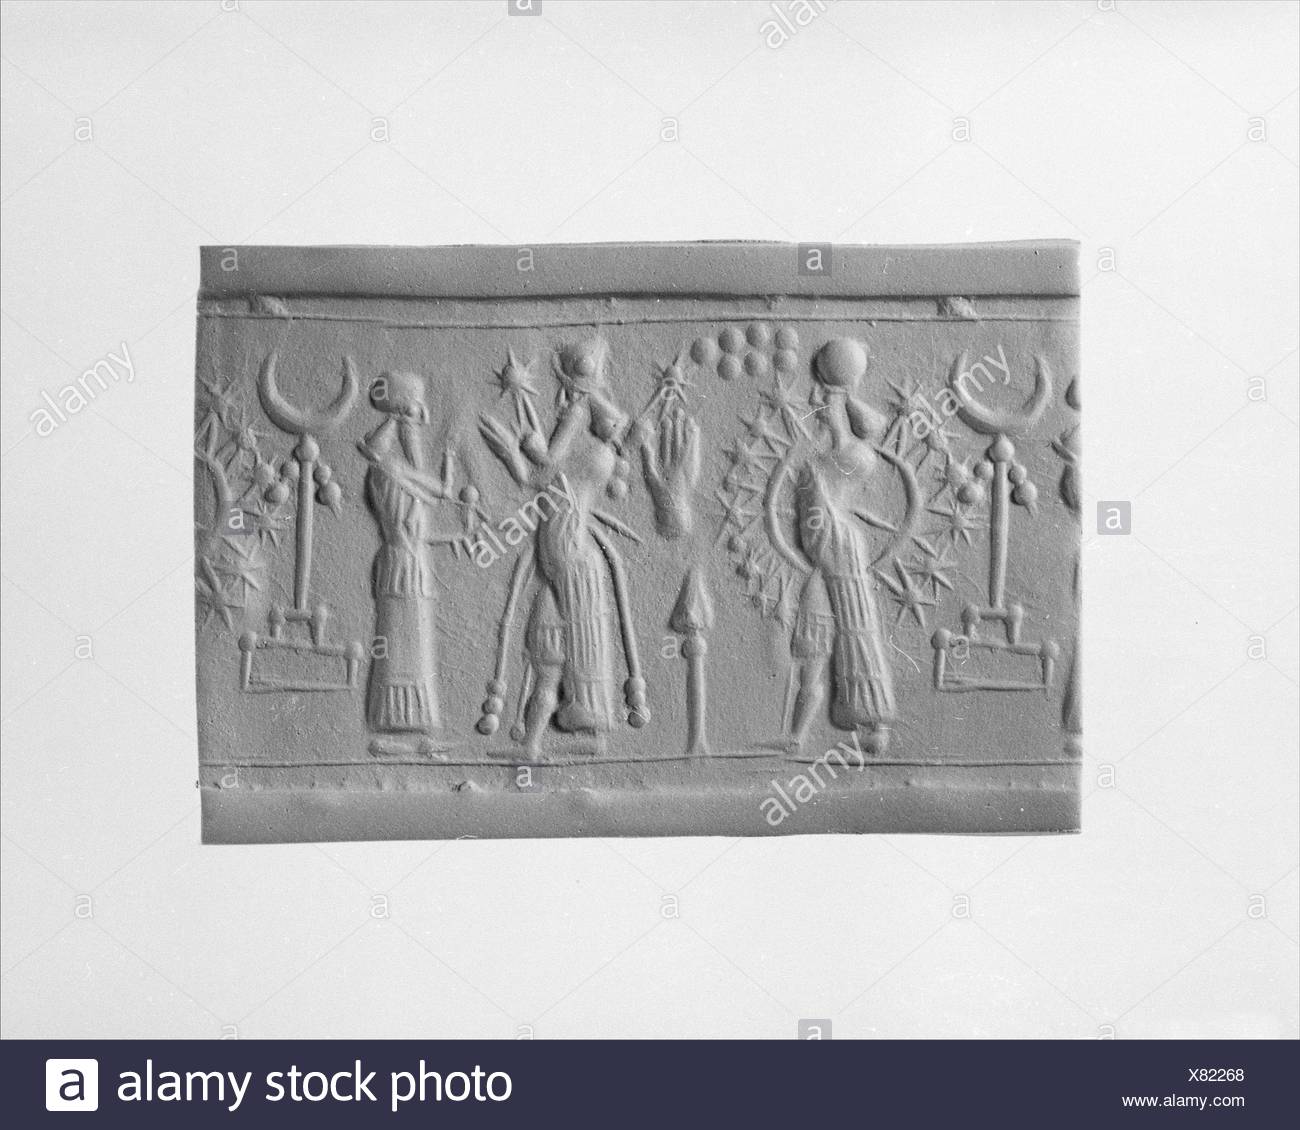 45 - Enlil's 7-Planets symbol of his authority on Earth, the 7th planet plus Nannar's Moon crescent & Marduk's rocket; Enlil addresses son Ninurta & granddaughter Inanna with alien technologies